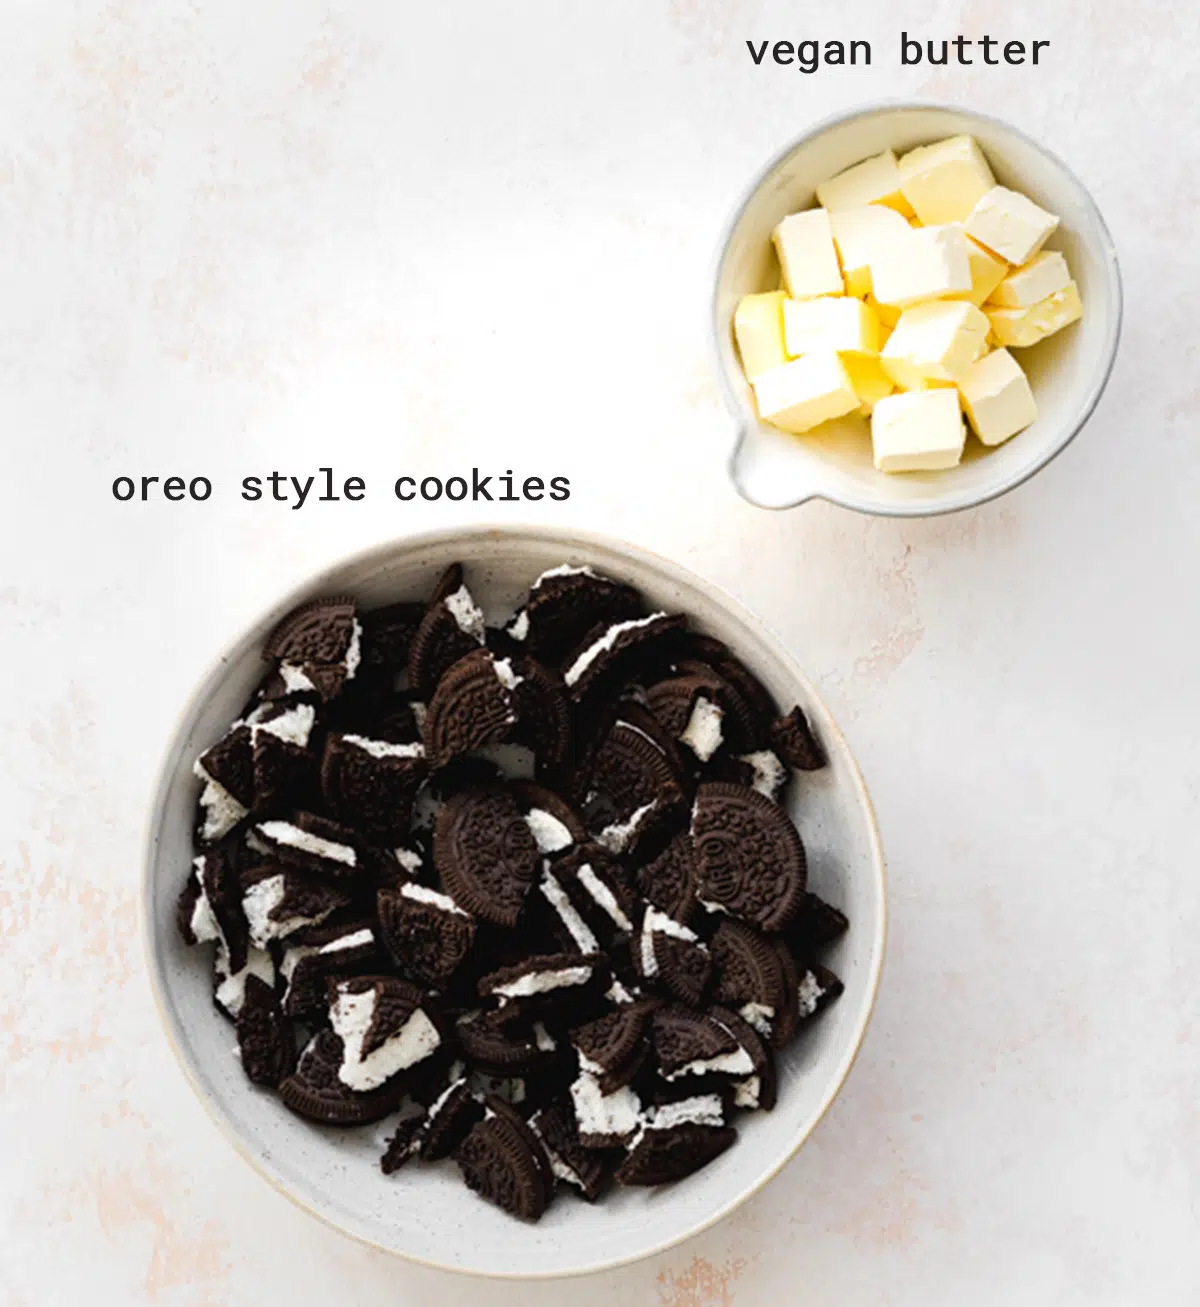 two bowls with oreo cookies and vegan butter on a flatlay peach stone surface